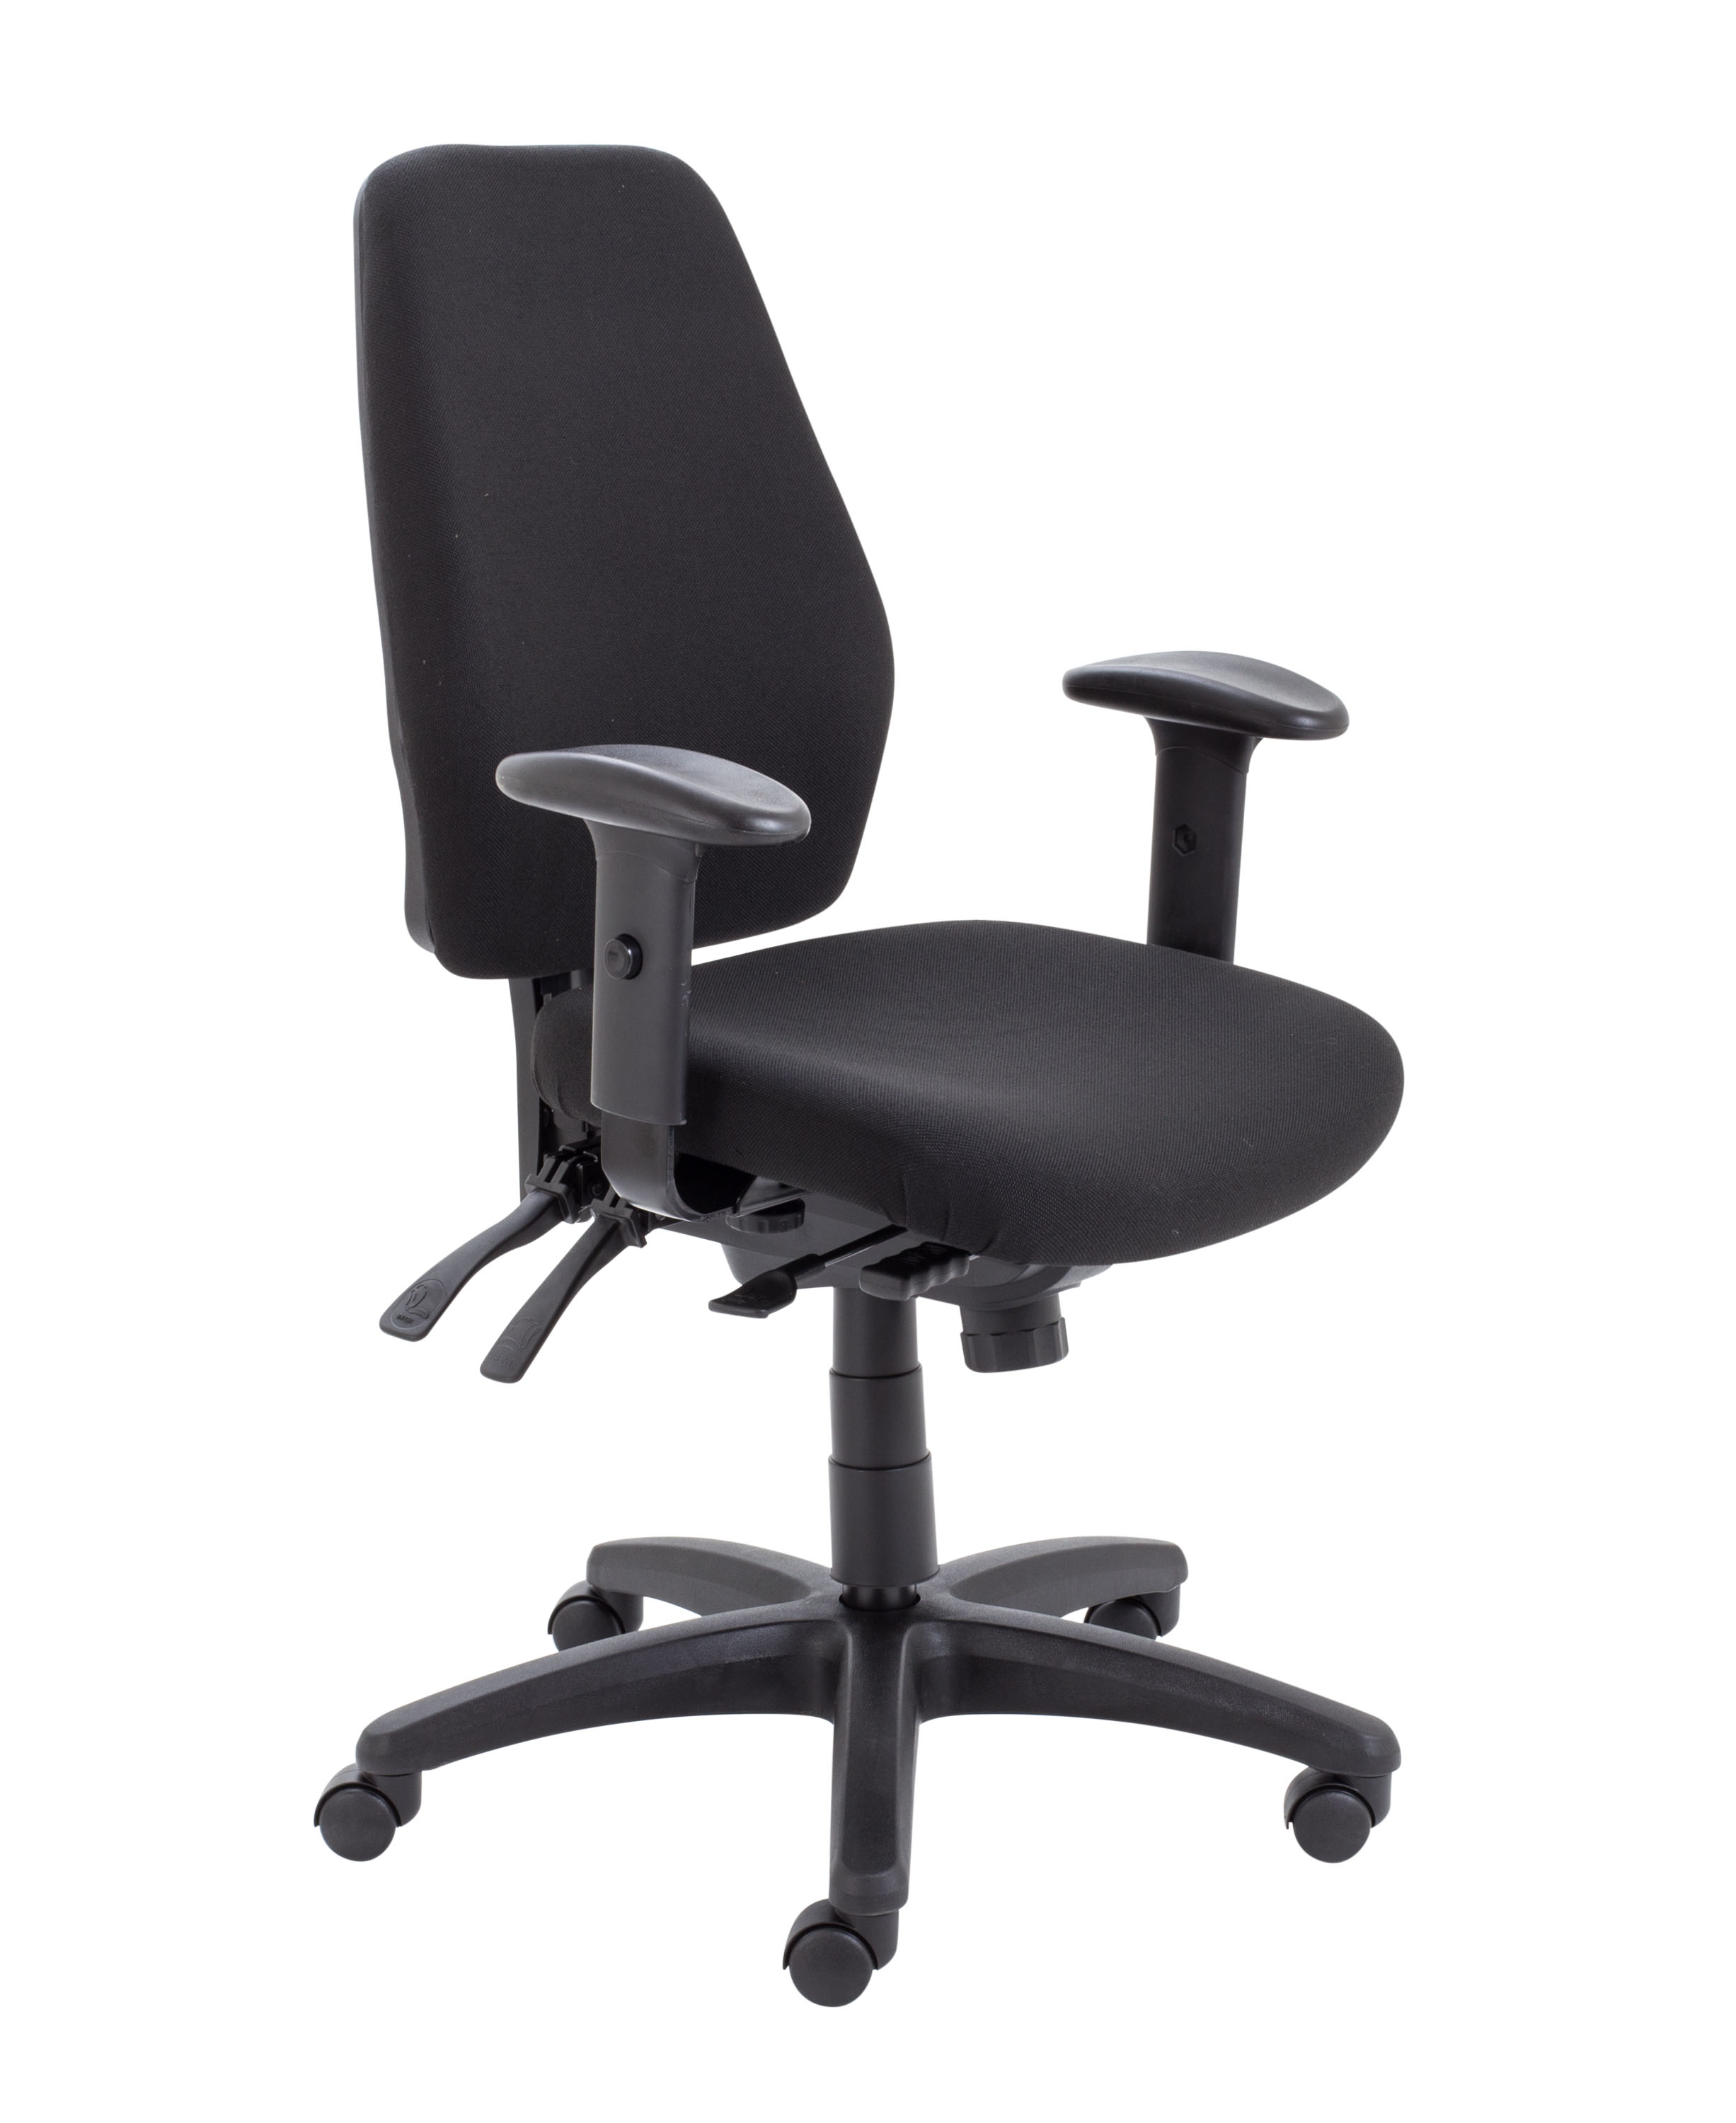 Call Centre Chair Without Seat Slide - Black